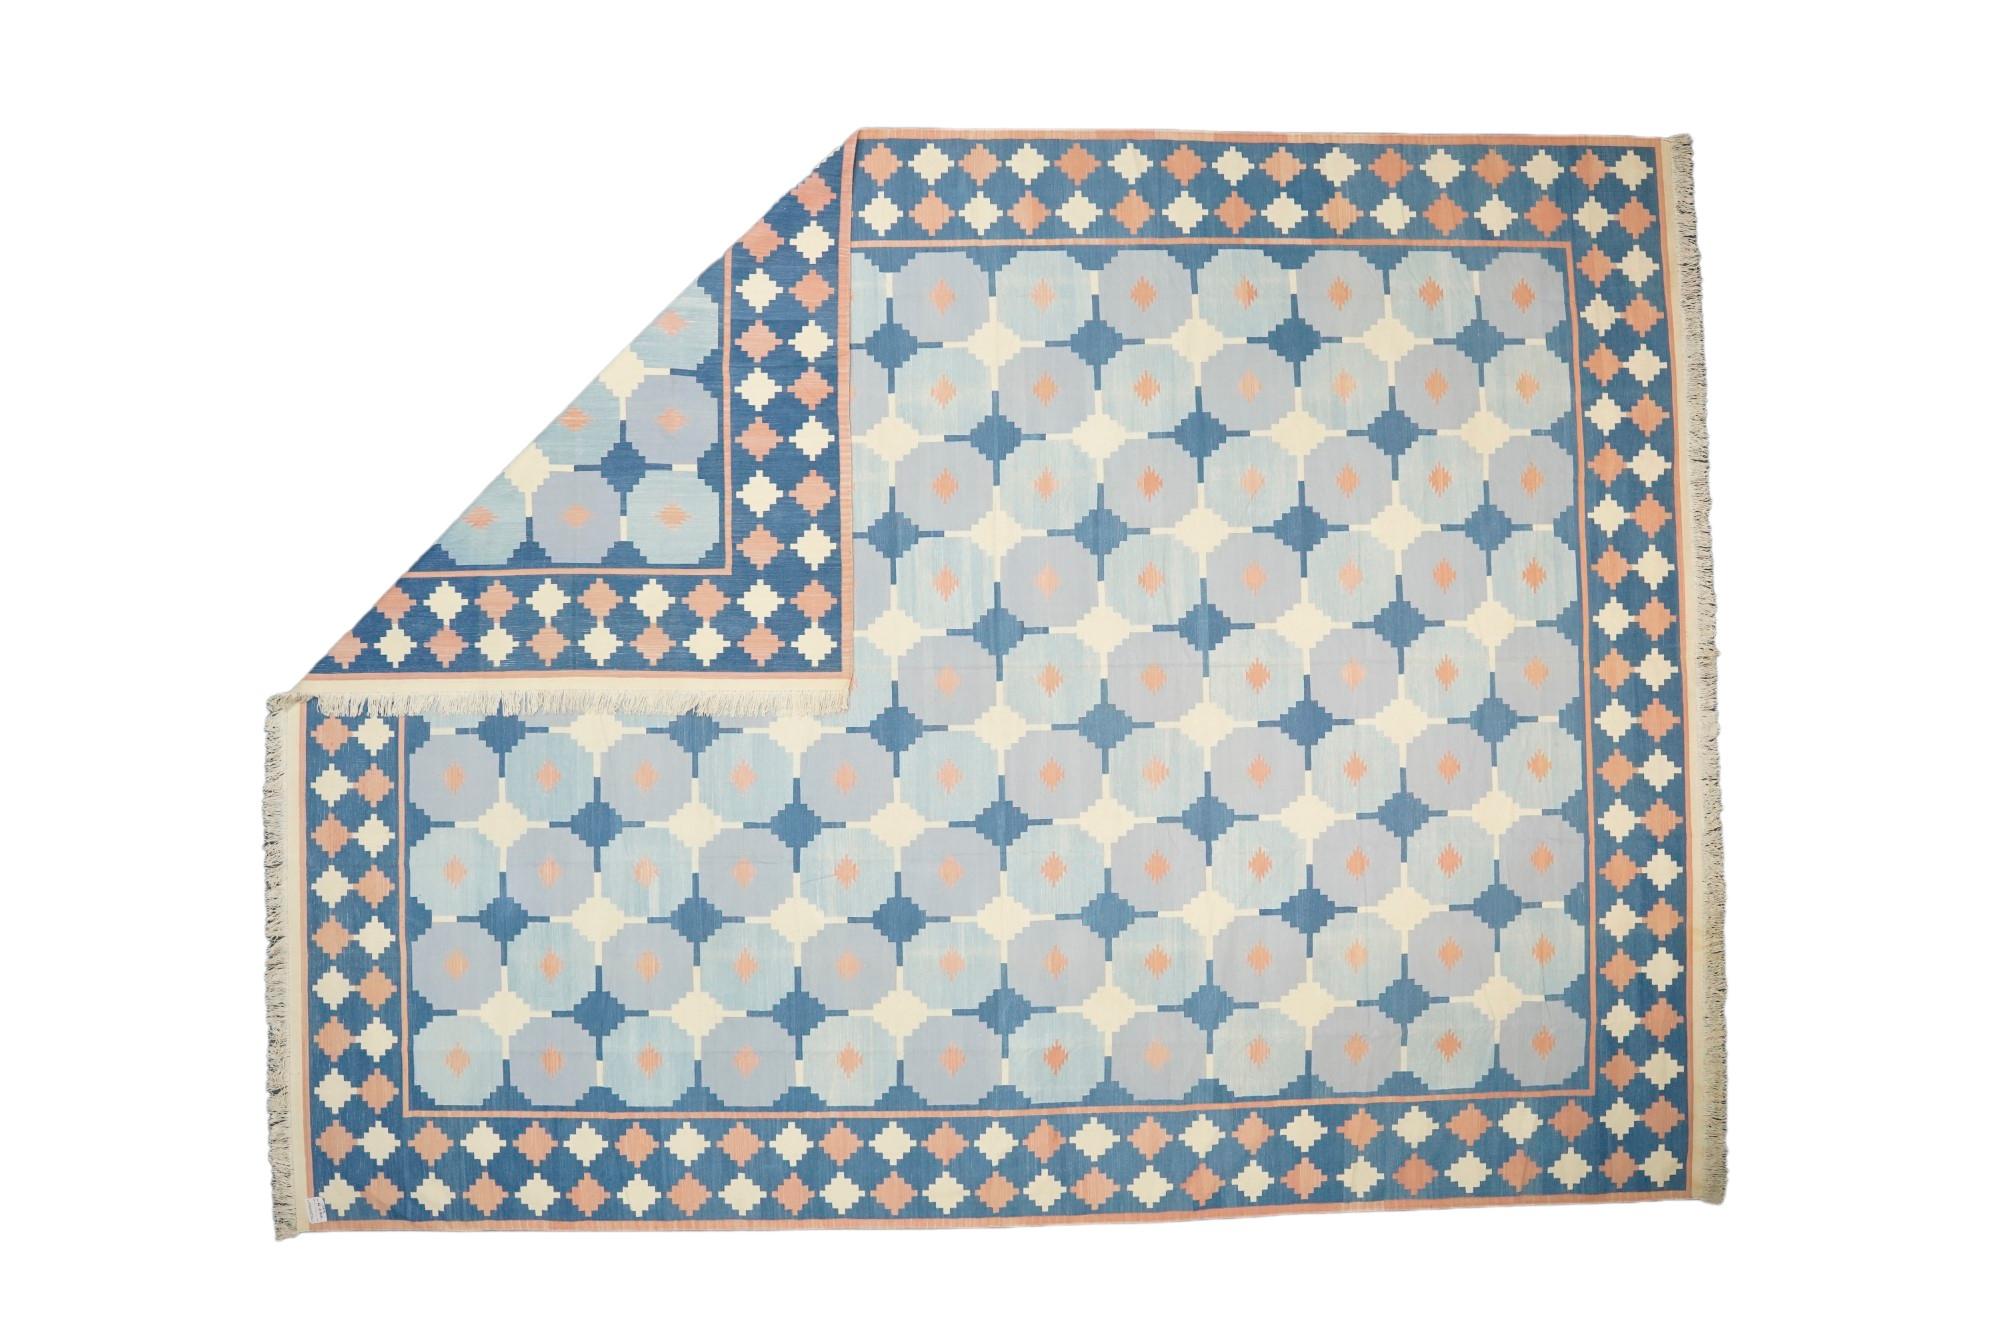 This 12x16 rug is a rare vintage Dhurrie rug from an exciting new mid-century curation by Rug & Kilim. Handwoven in a wool flatweave, it originates from India circa 1950-1960, and enjoys blue and white geometric patterns.

On the Design: 

Admirers